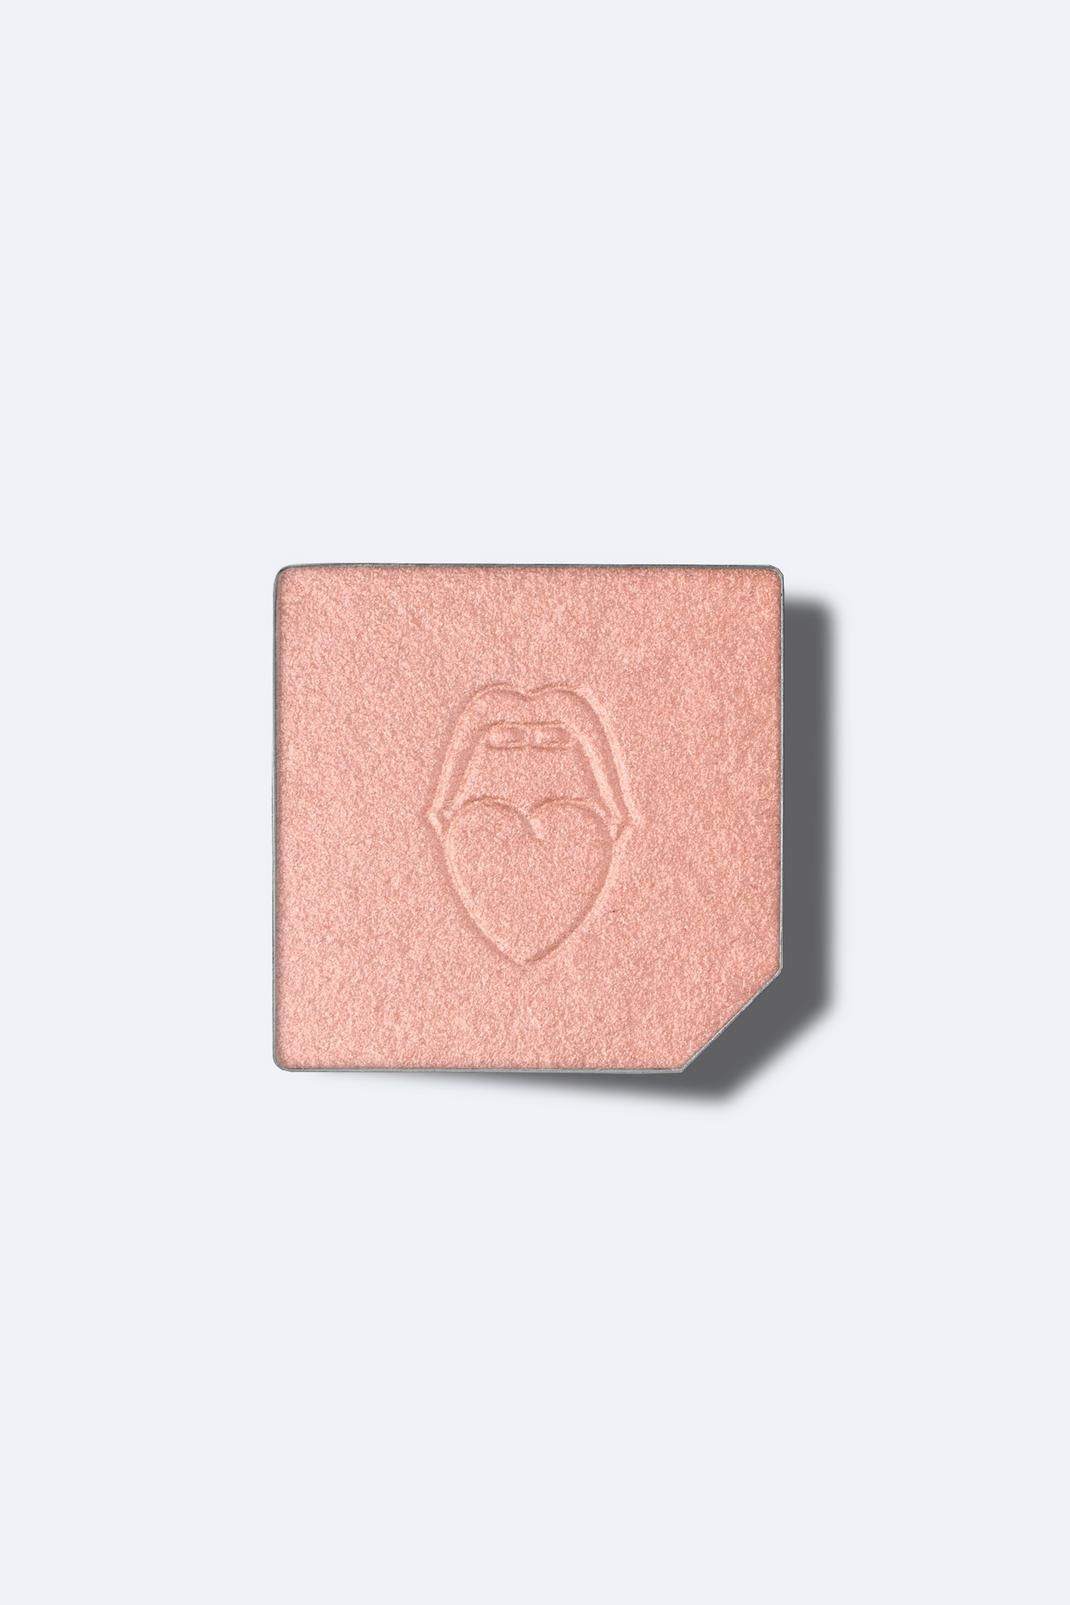 Nasty Gal Beauty - Highlighter en poudre rechargeable, Rose image number 1